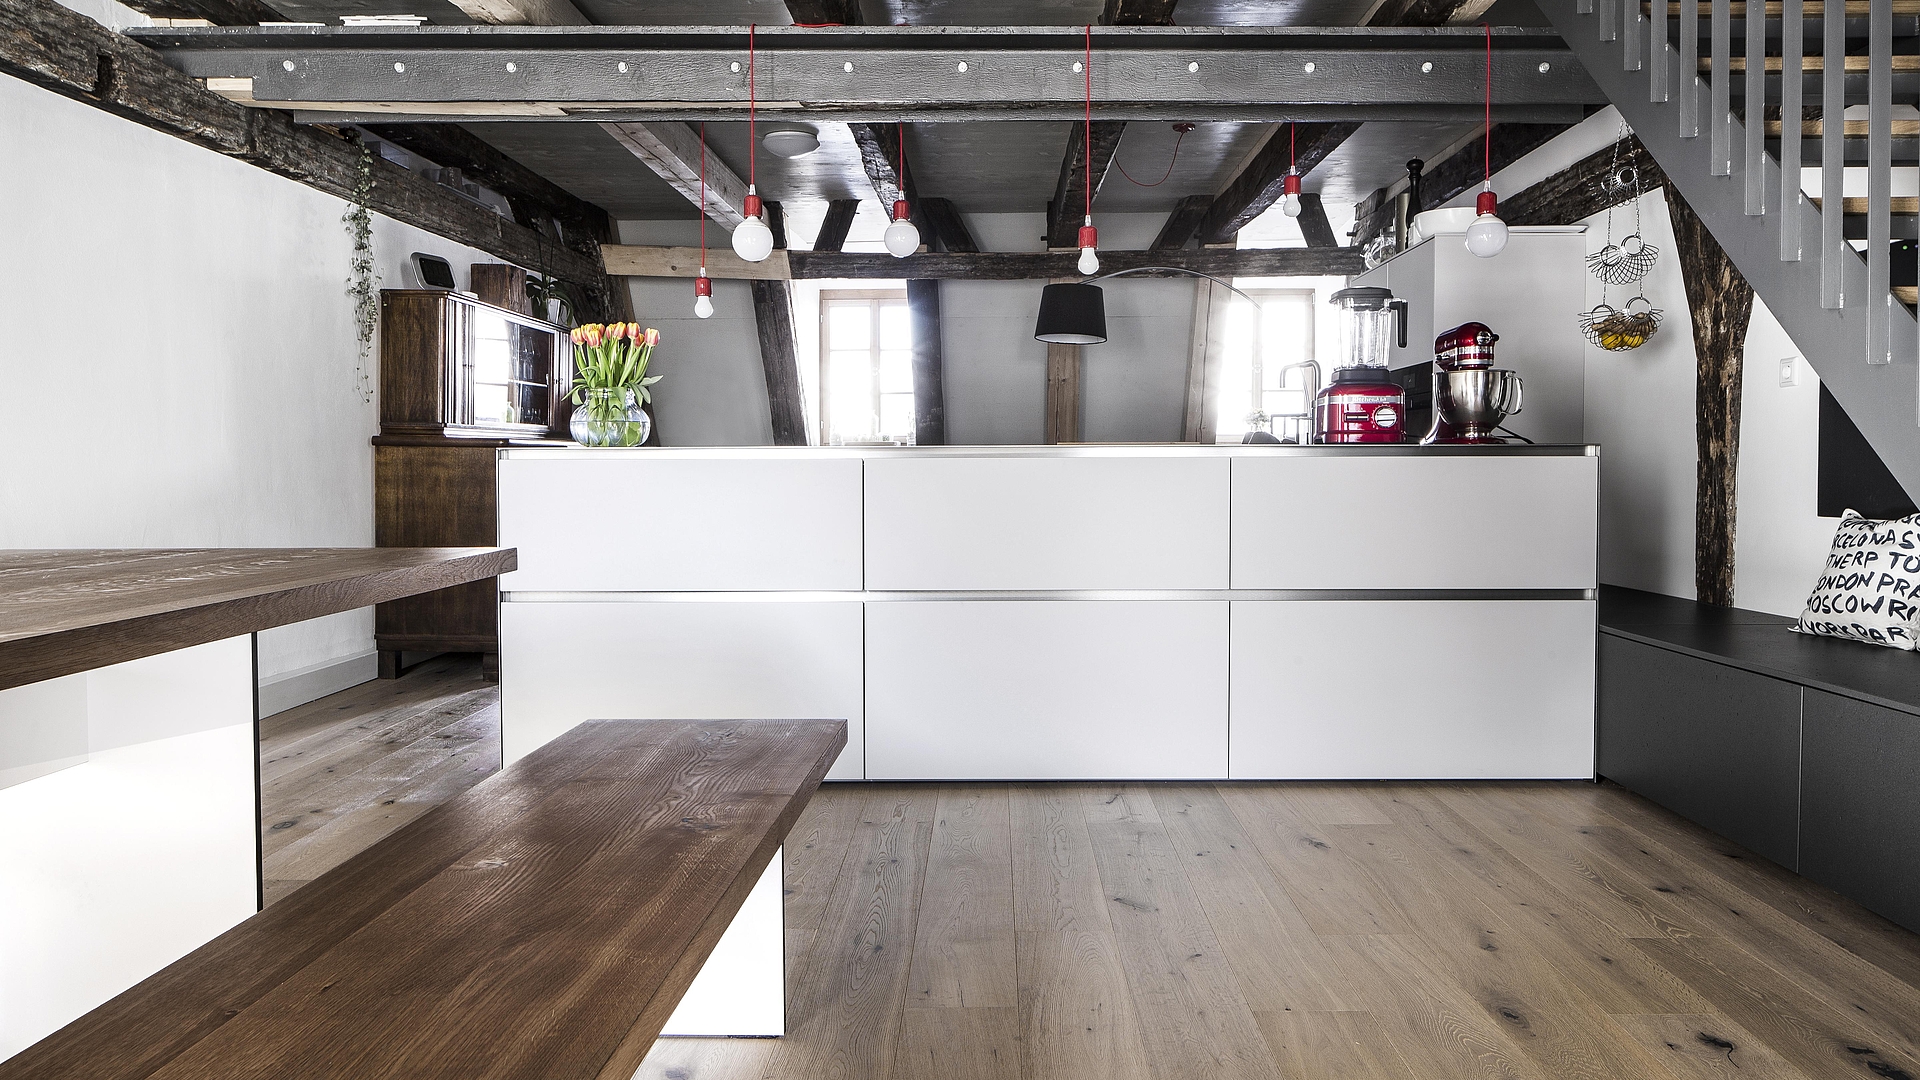 MODERN KITCHEN IN A HISTORICAL TOWN HOUSE